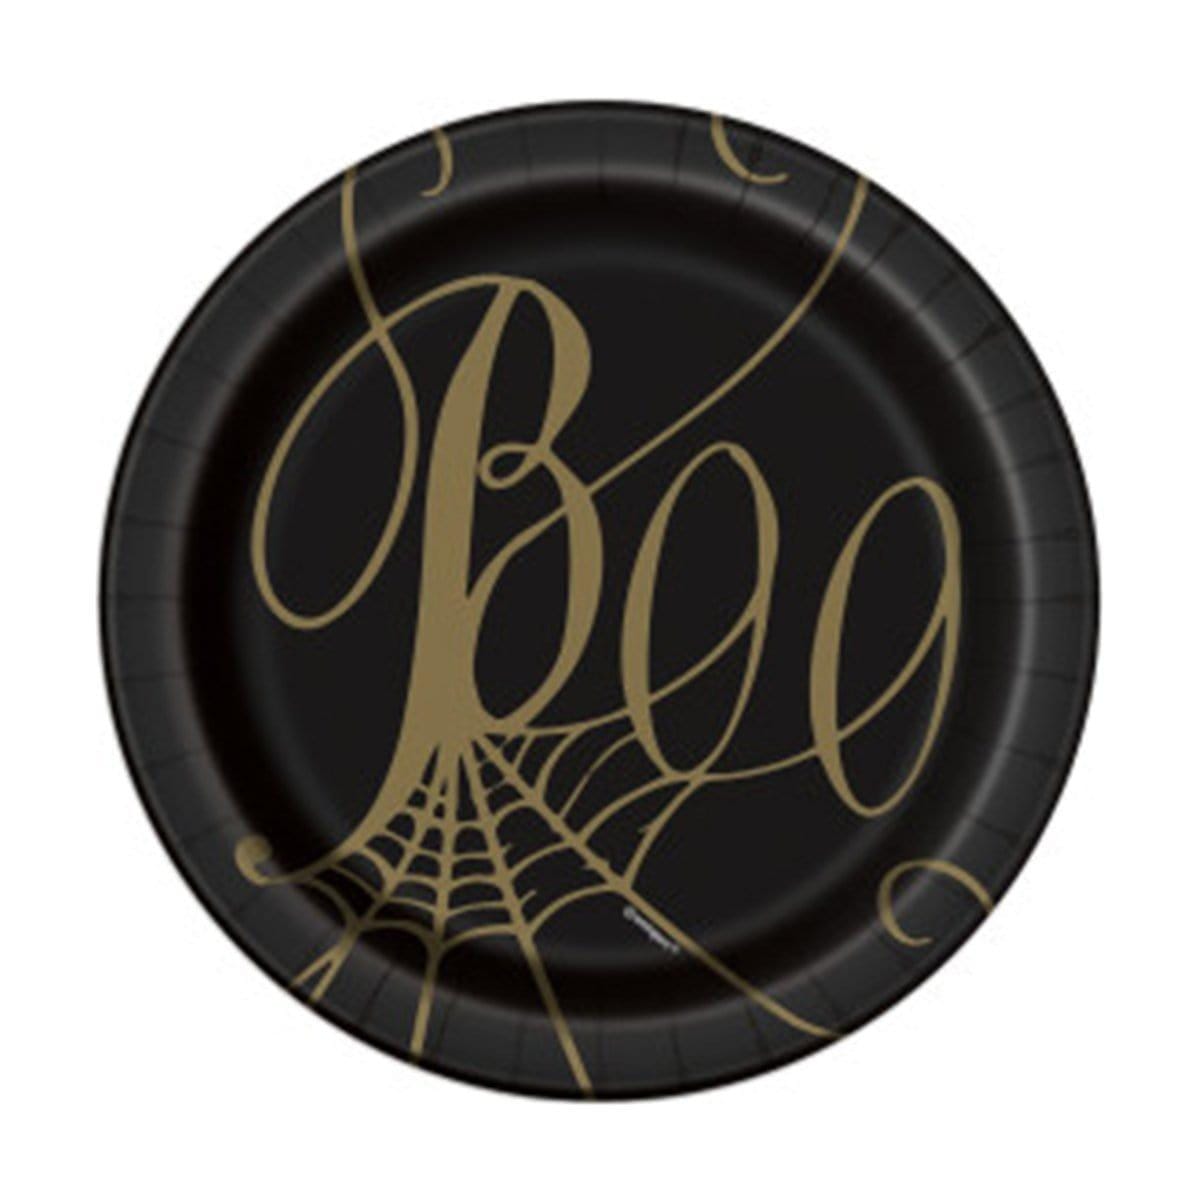 Buy Halloween Black & Gold Spider Web paper plates 7 inches, 8 per package sold at Party Expert